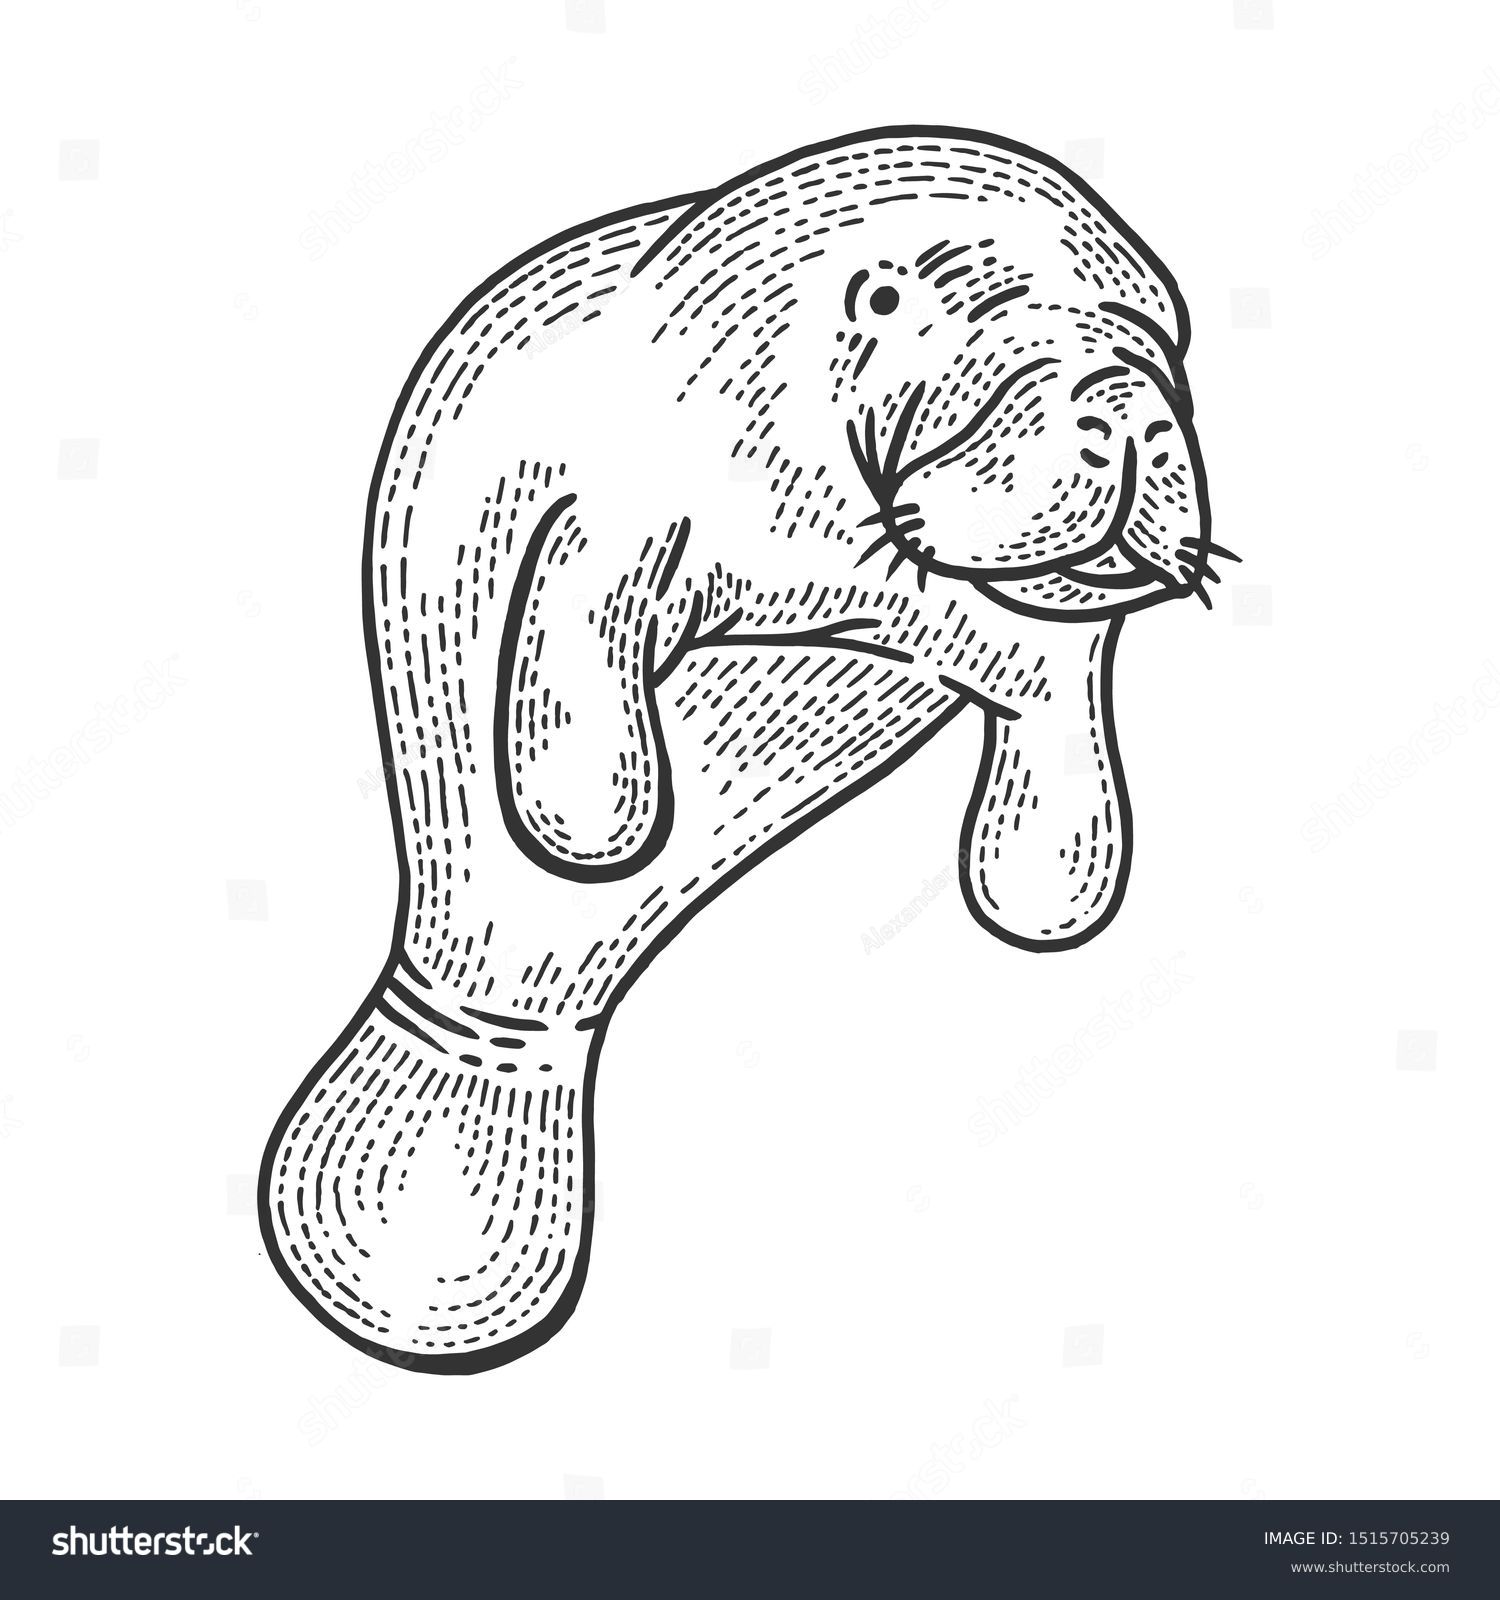 SVG of Manatee water animal sketch engraving vector illustration. Scratch board style imitation. Hand drawn image. svg